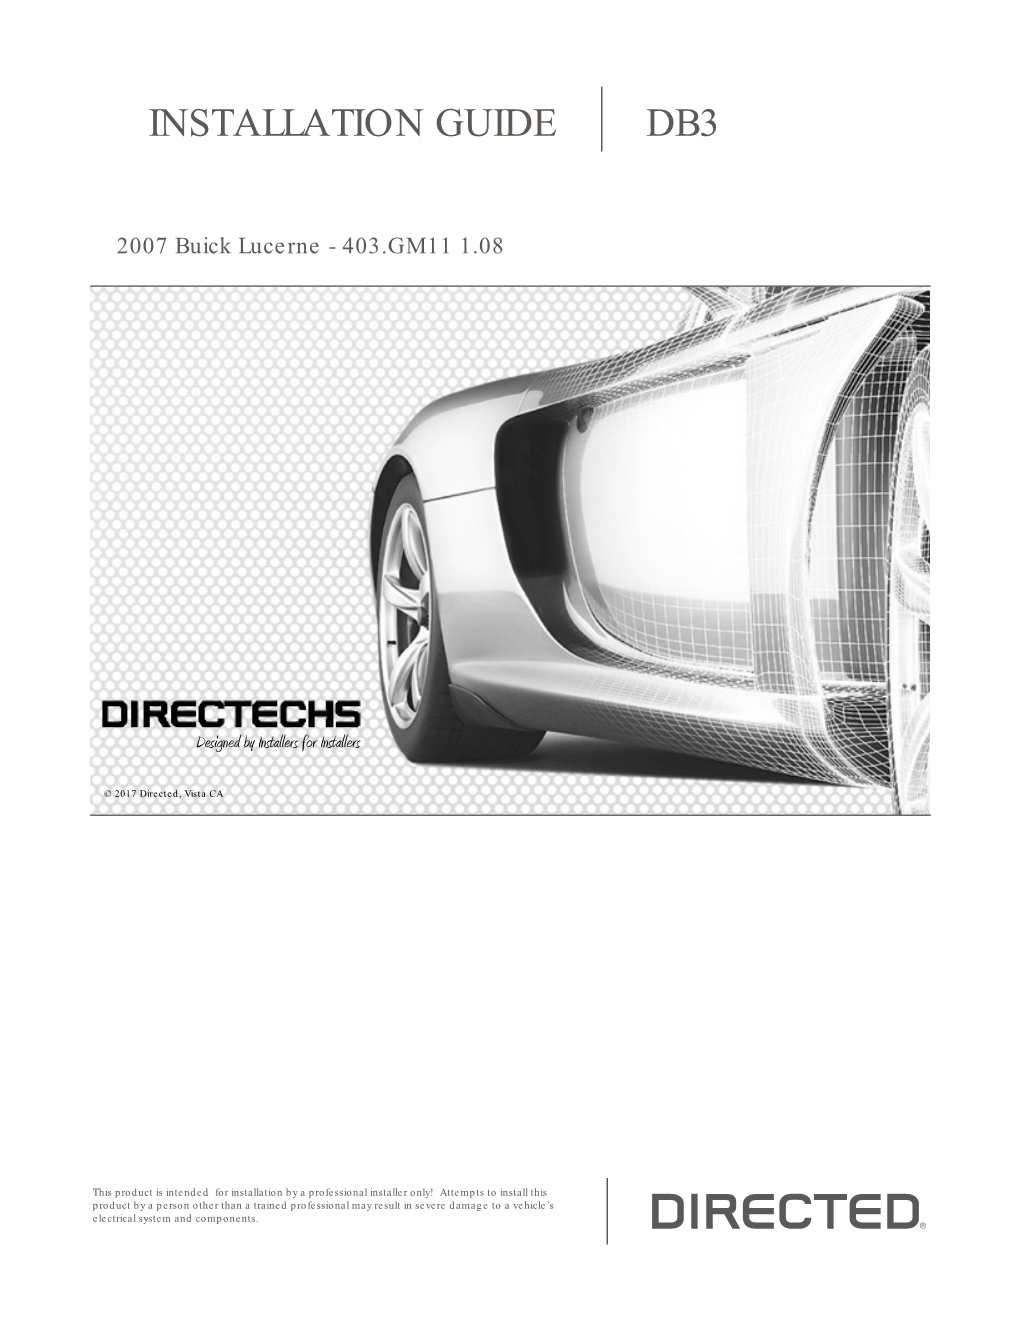 Installation Guide. 2007 Buick Lucerne